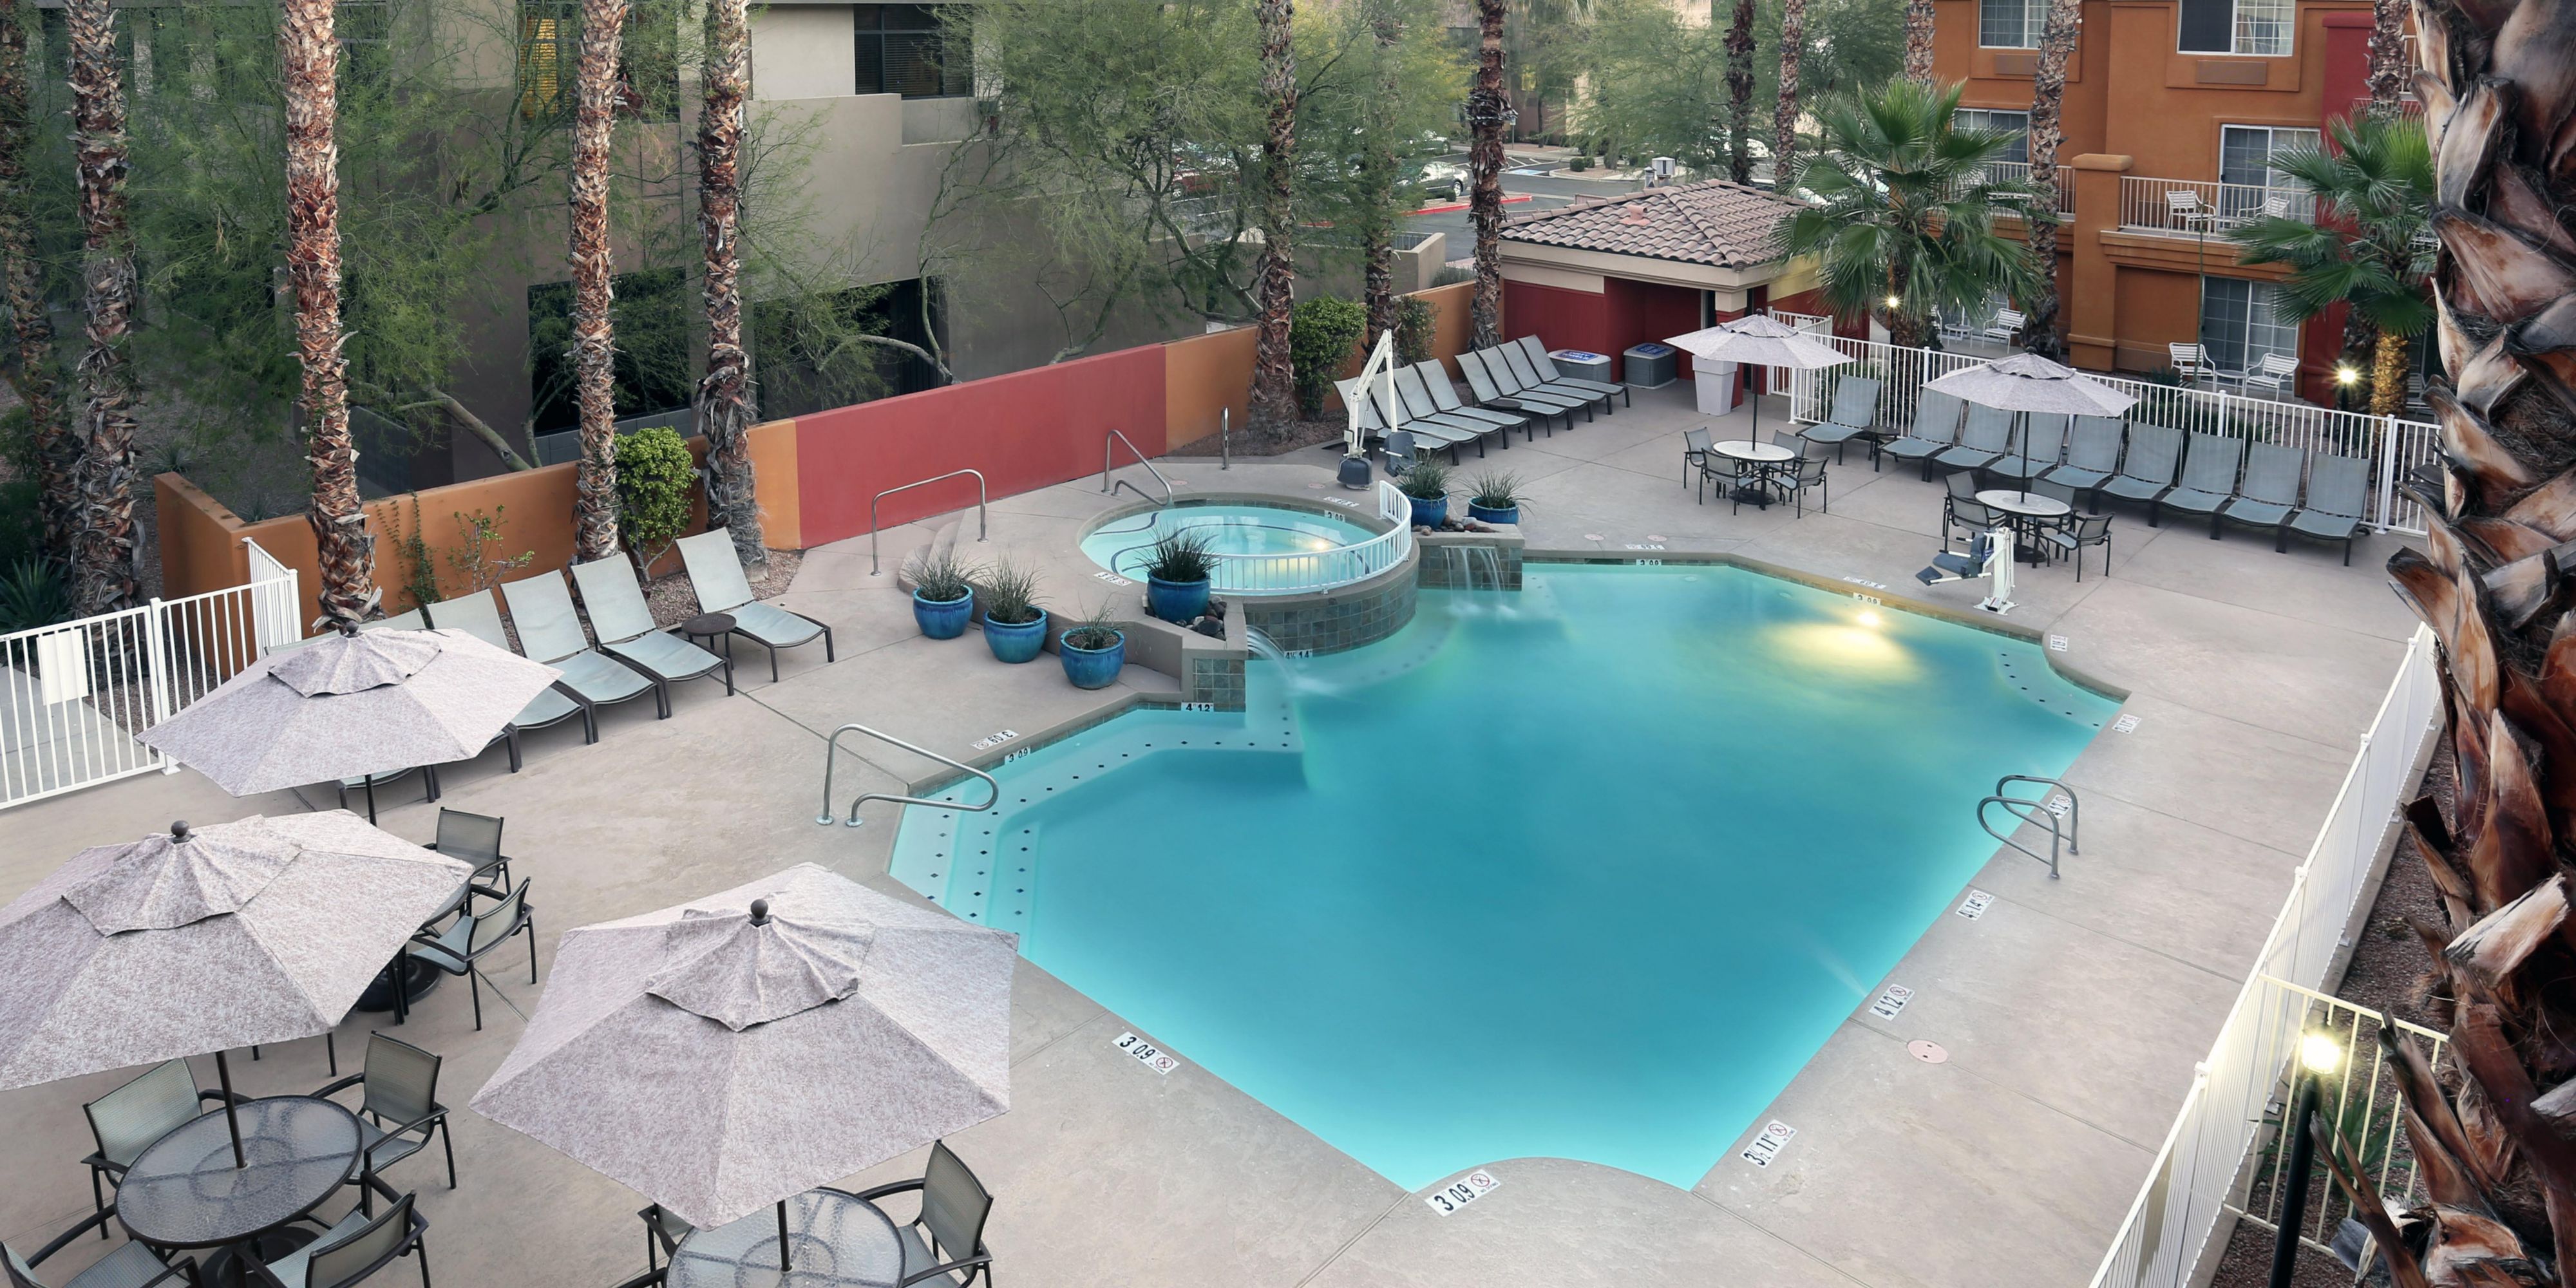 Check out our beautiful outdoor pool with a variety of outdoor seating!  It's a beautiful area to read the paper with a cup of coffee in the morning, swim in the hot afternoons, or relax in the outdoor hot tub after a day out and about.